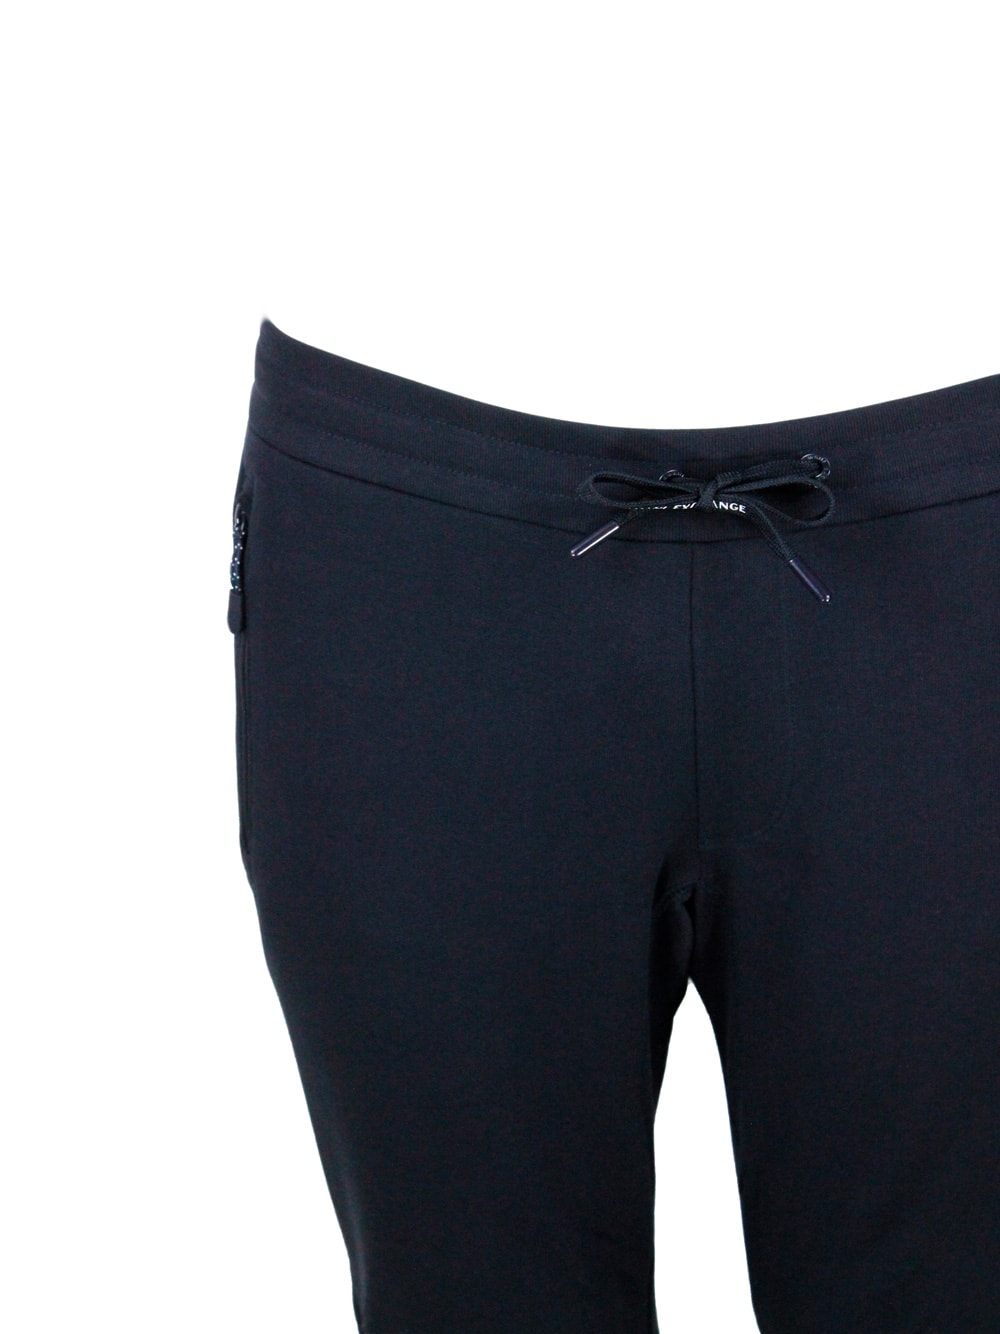 Shop Armani Collezioni Cotton Fleece Jogging Trousers With Drawstring At The Waist And Cuff At The Bottom In Blu